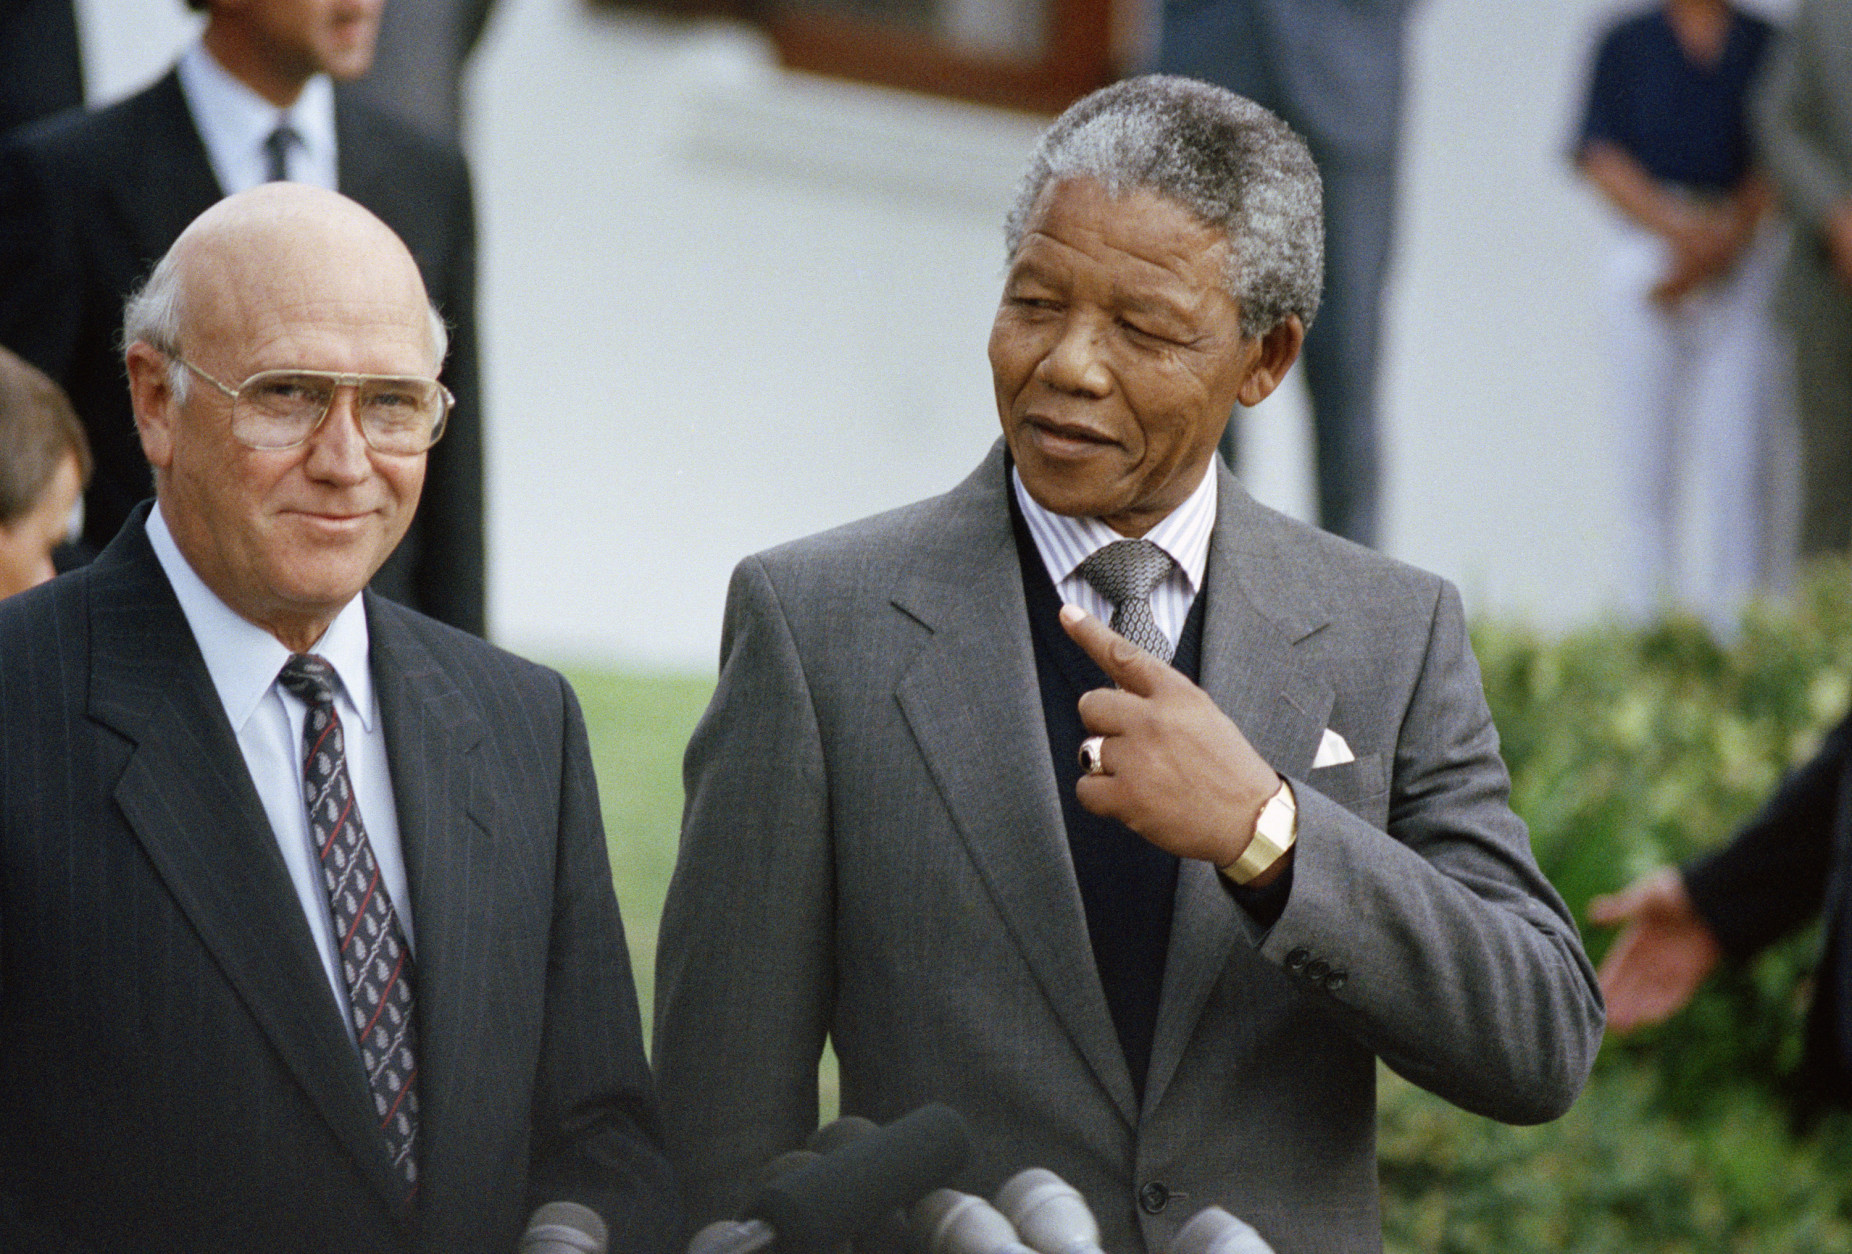 South African State President F W de Klerk, left,  and Deputy President of the African National Congress Nelson Mandela, right,  at a photocall on Wednesday, May 2, 1990 in Cape Town, South Africa, prior to meeting for talks which will last till Friday. (AP Photo/Denis Farrell)